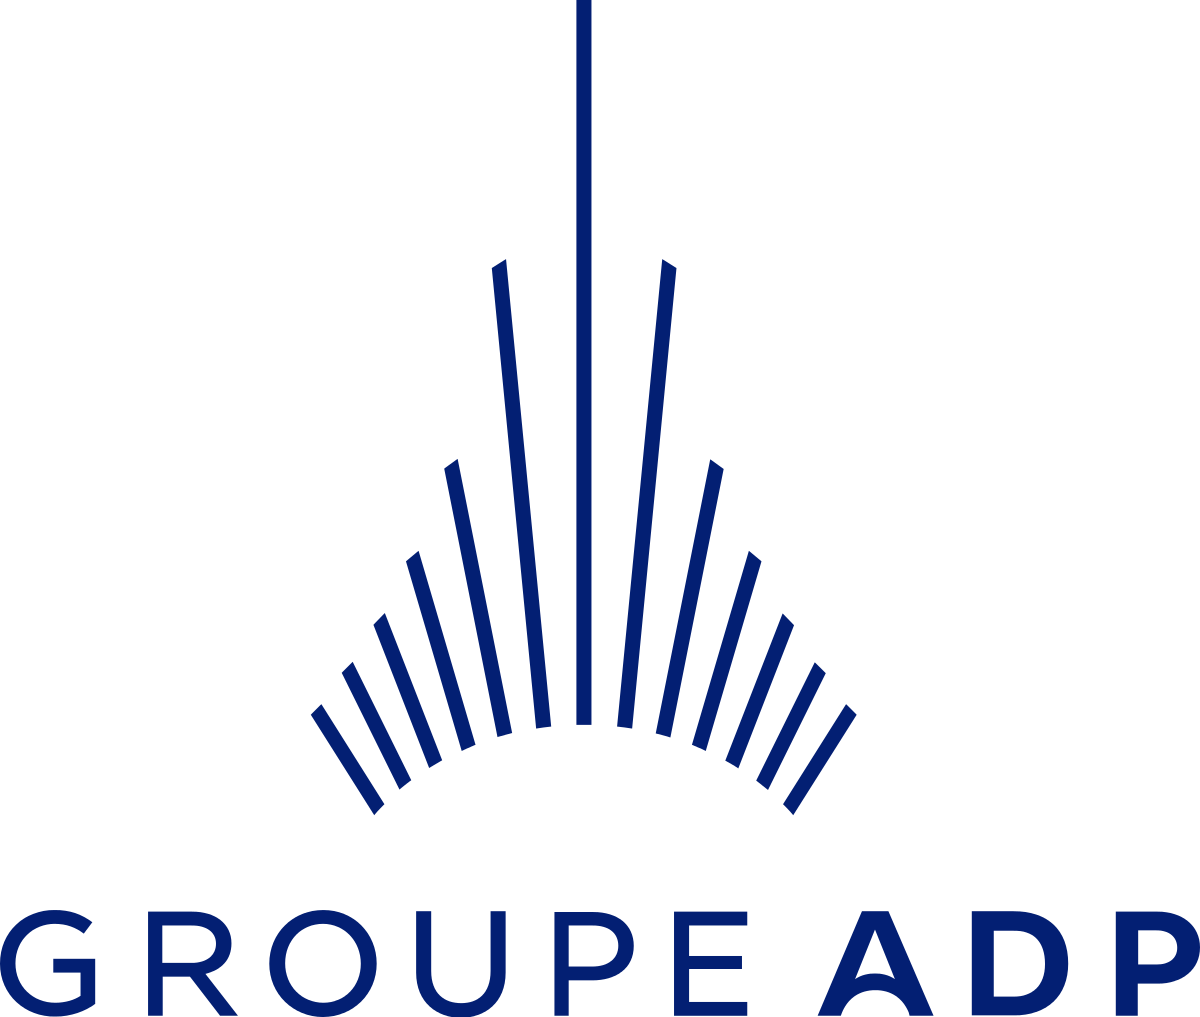 Logo of Groupe ADP one of our partners